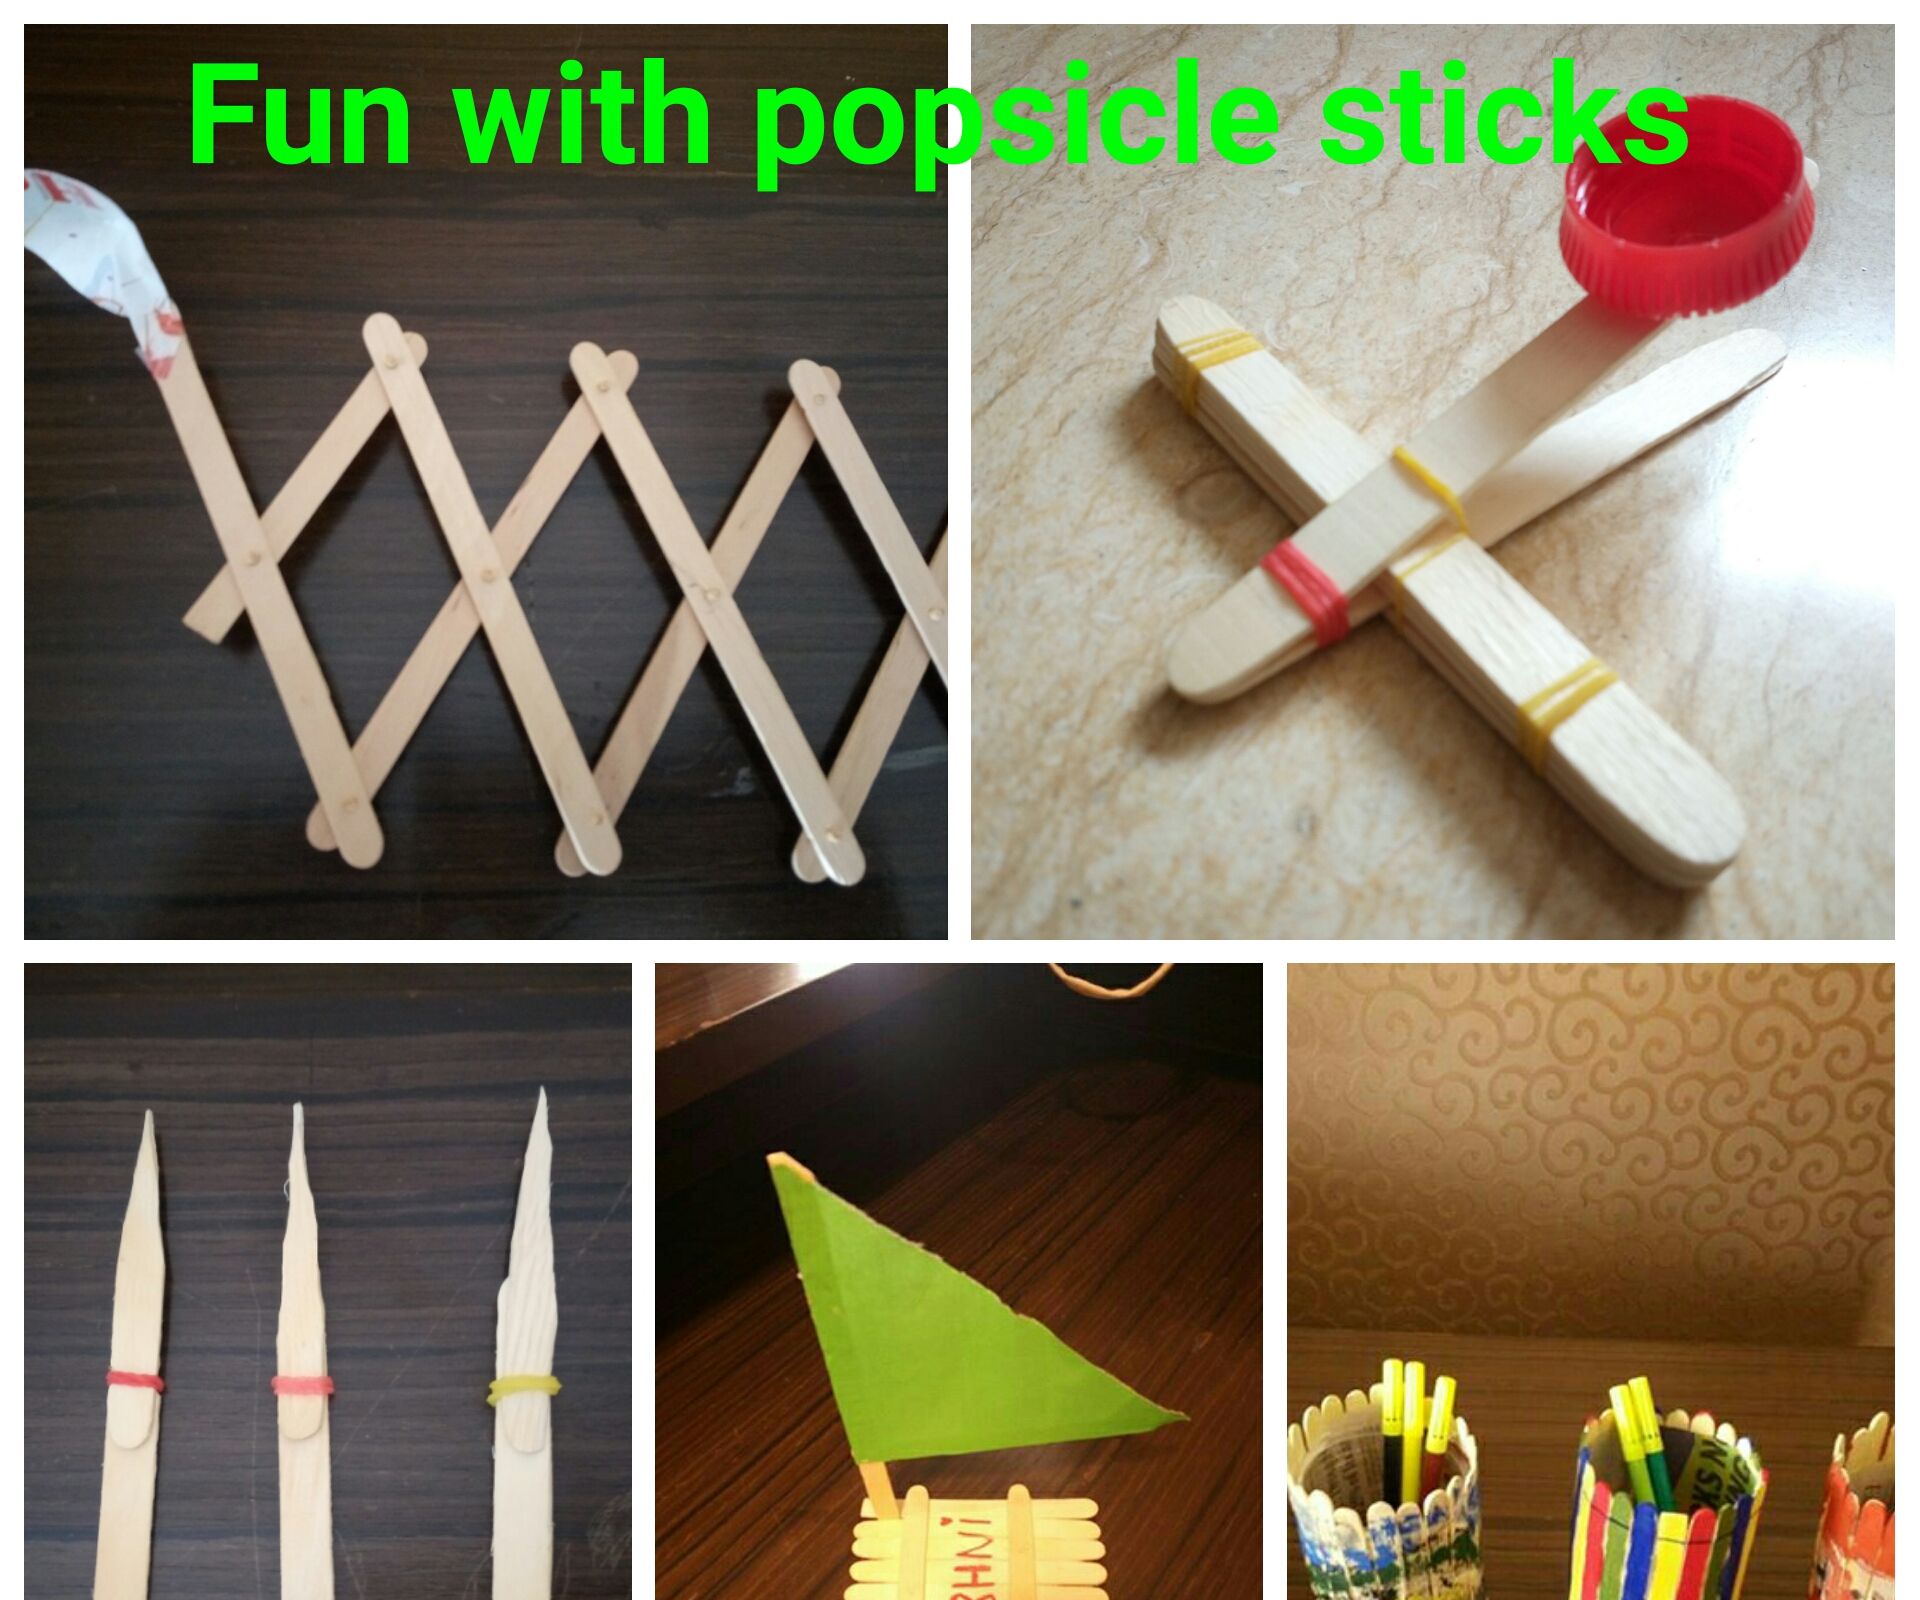 Fun With Popsicle Sticks for Kids